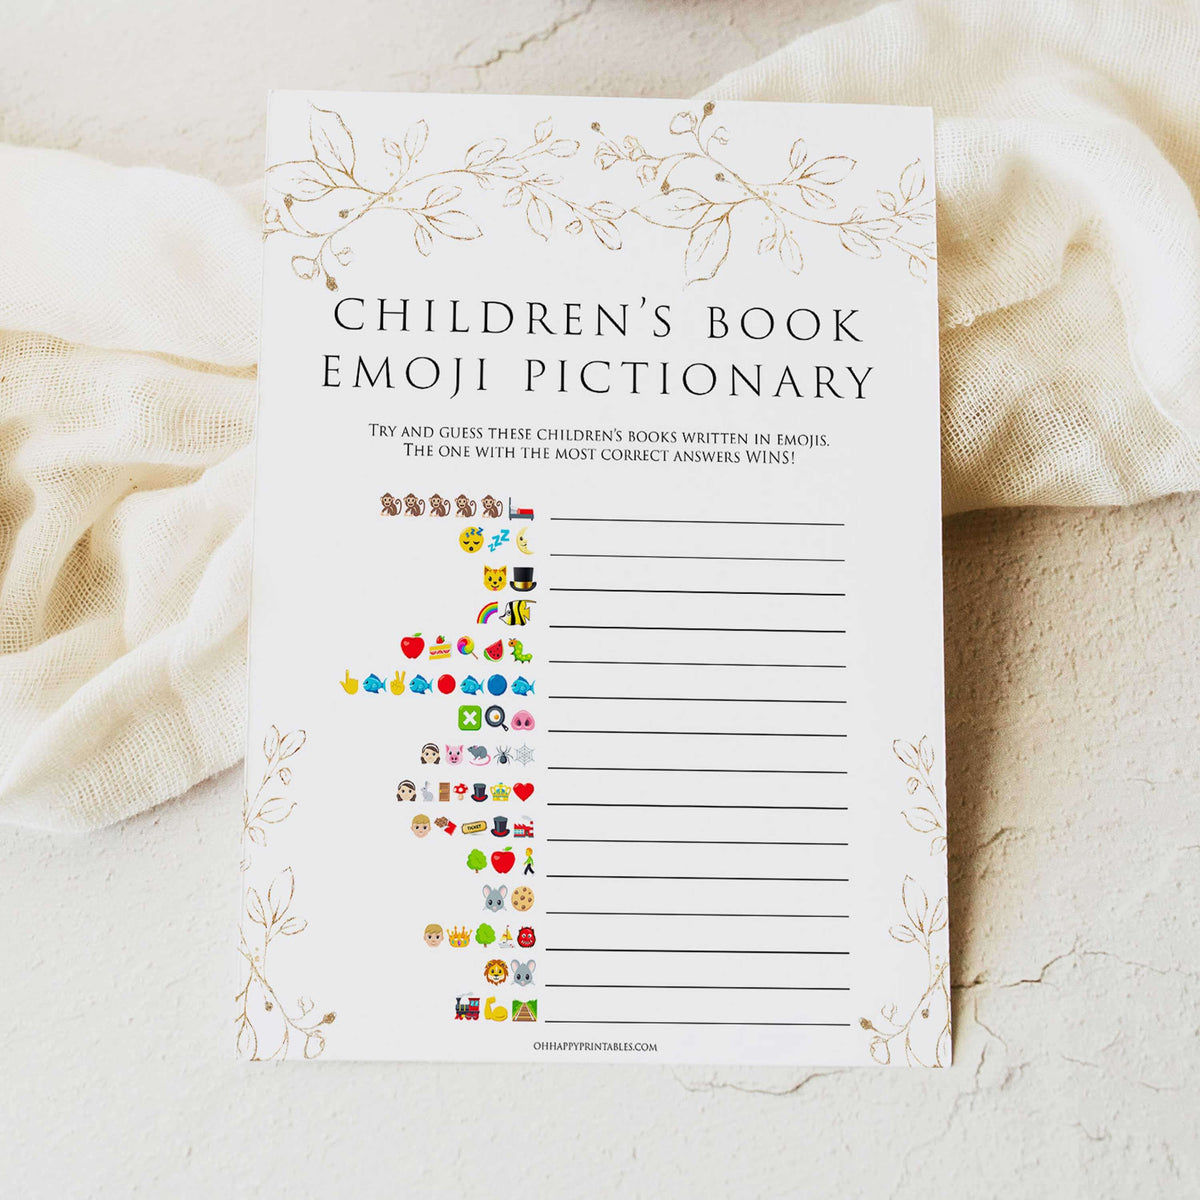 childrens books emoji Pictionary game, Printable baby shower games, gold leaf baby games, baby shower games, fun baby shower ideas, top baby shower ideas, gold leaf baby shower, baby shower games, fun gold leaf baby shower ideas